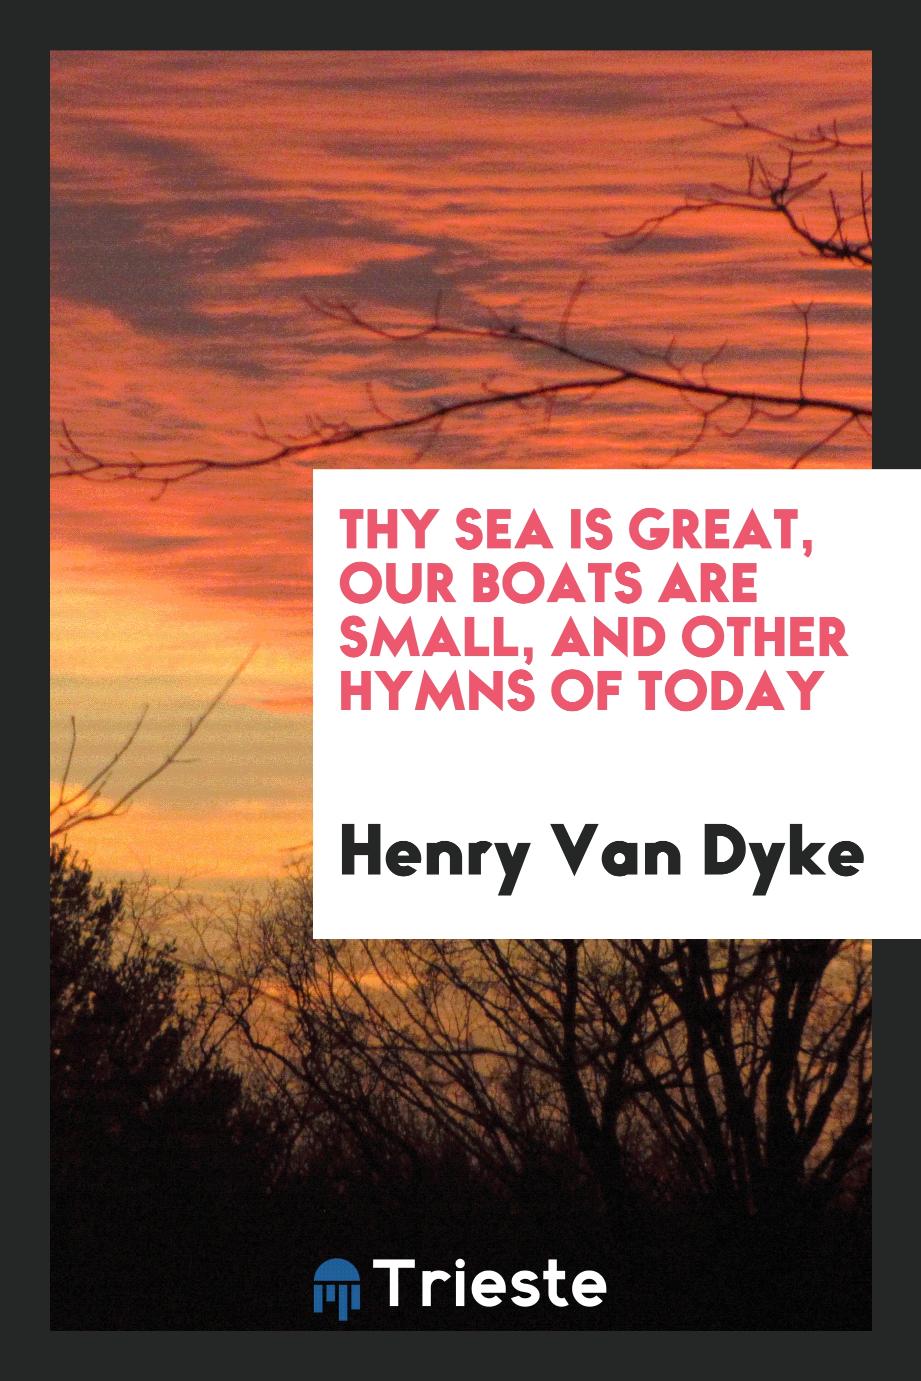 Thy sea is great, our boats are small, and other hymns of today